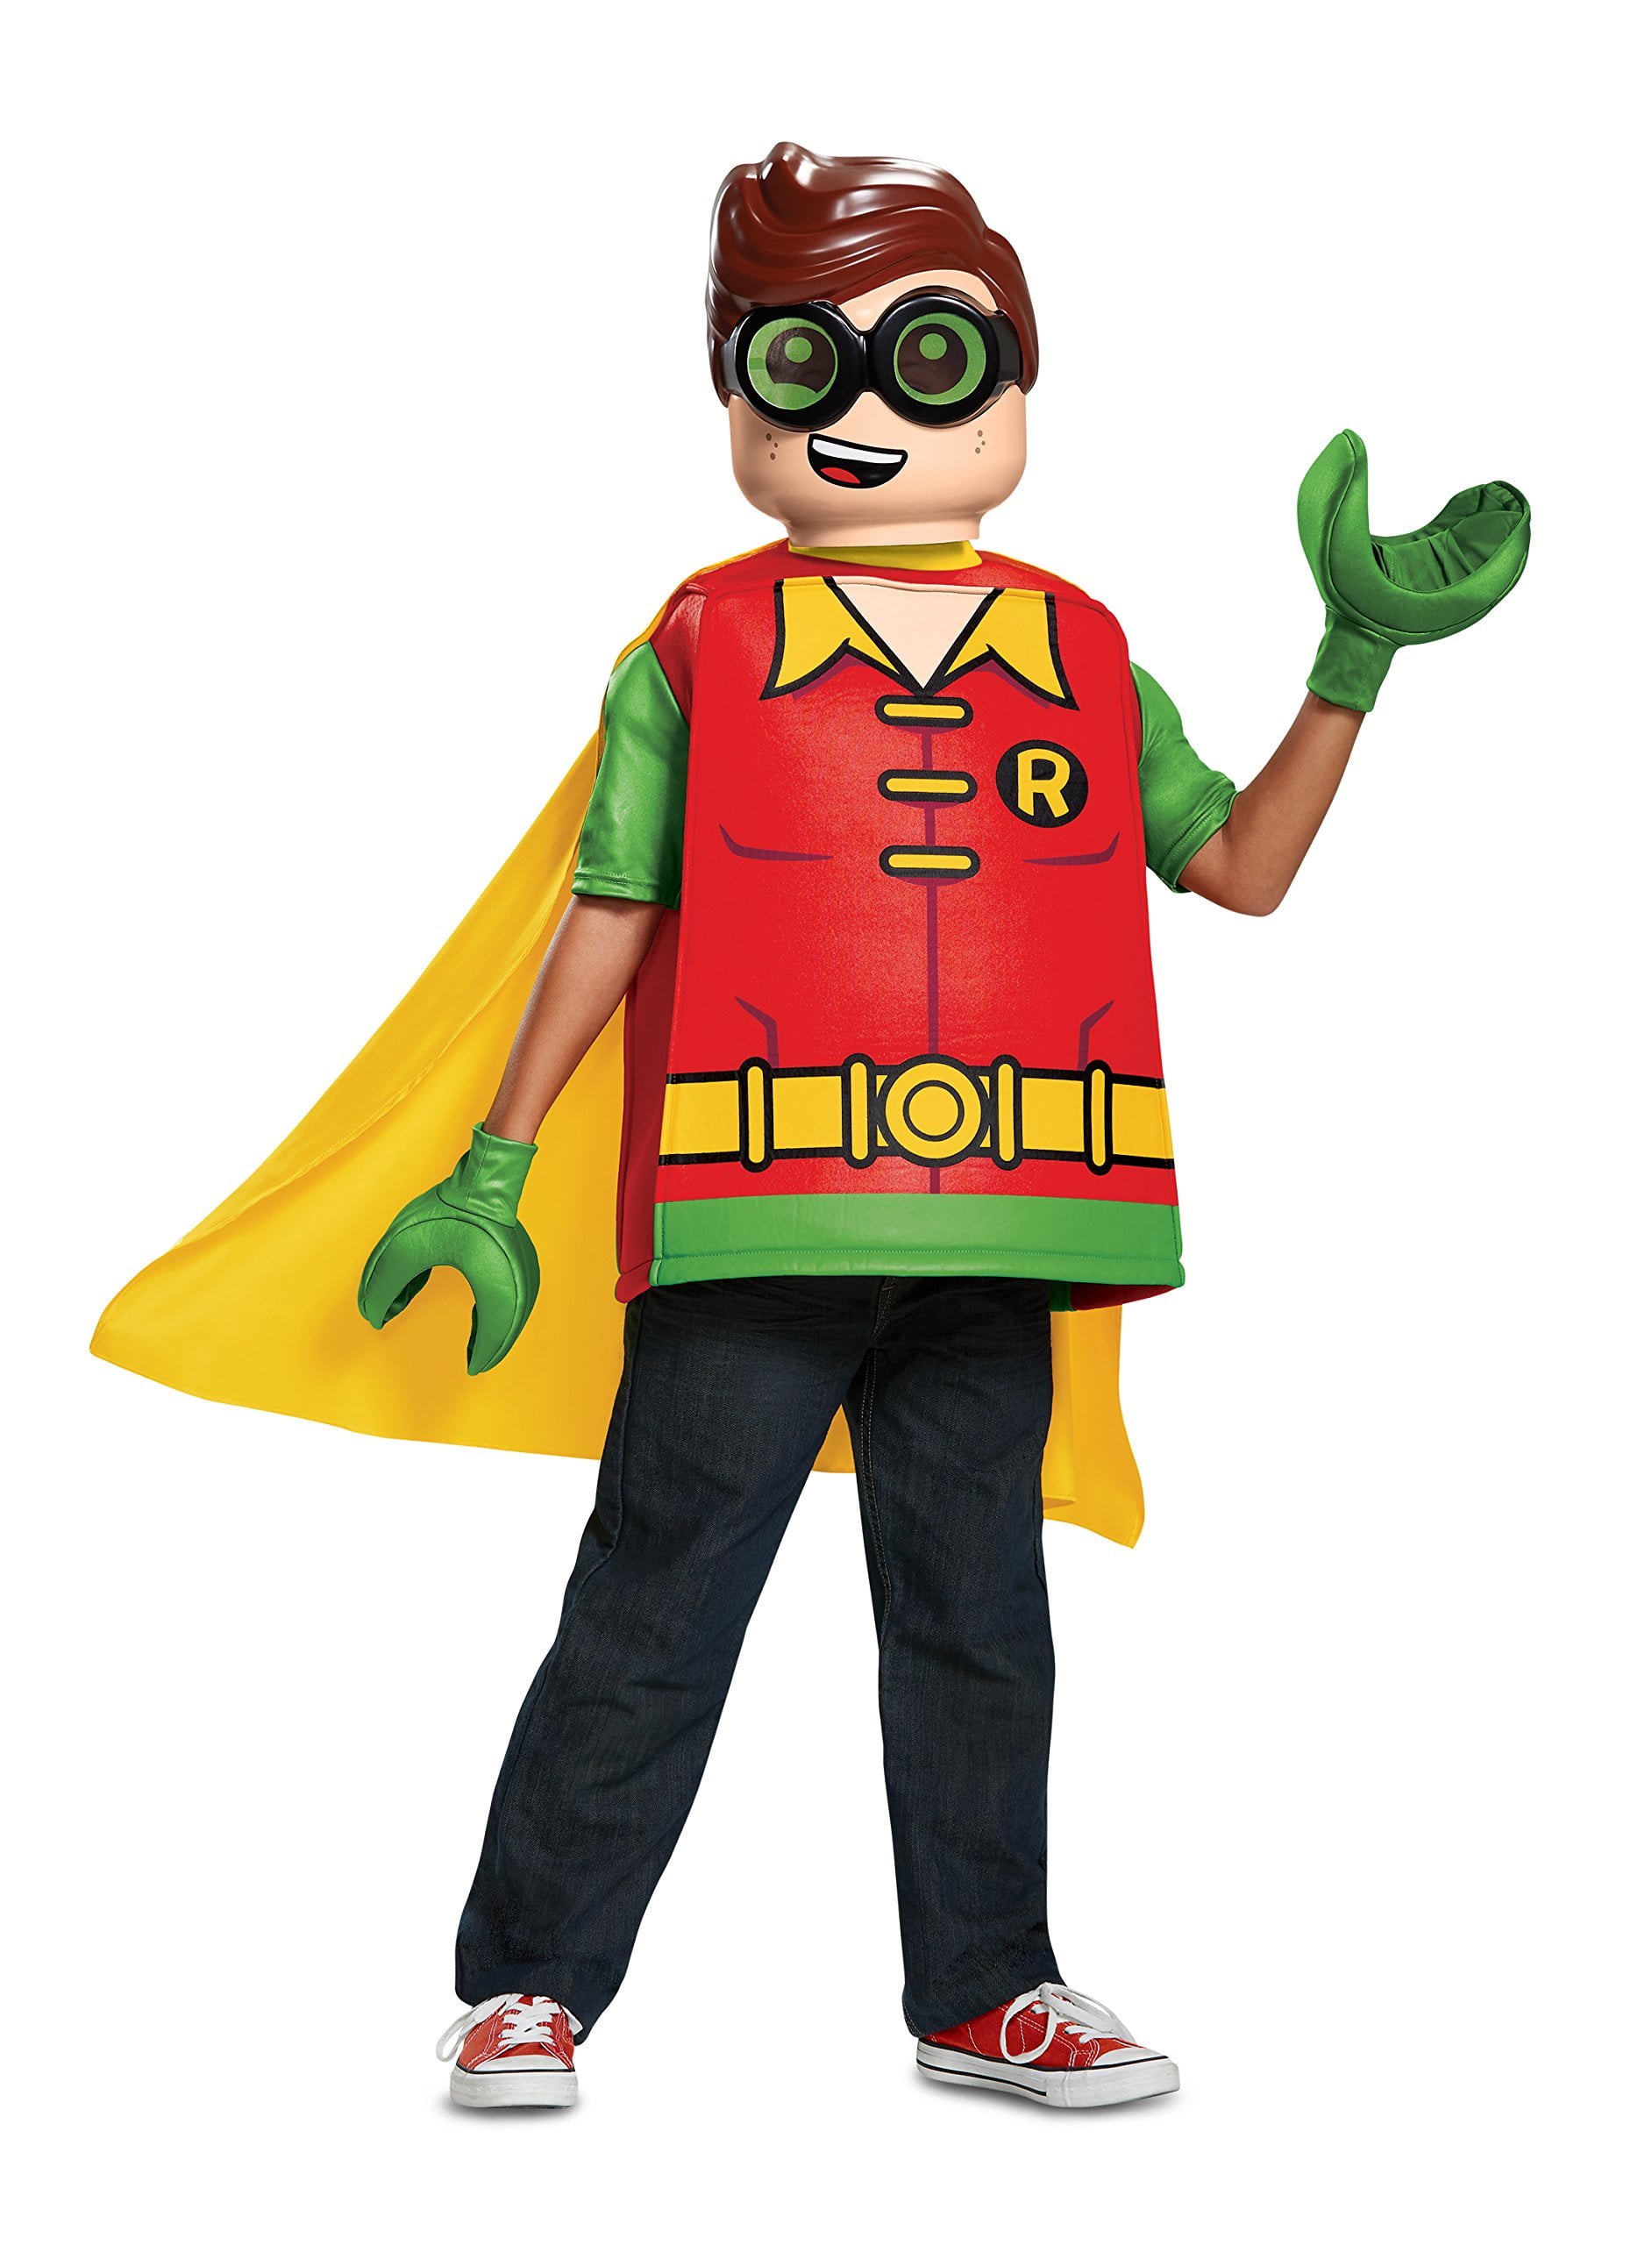 Robin  Boys Kids Muscle Costume Set Halloween Party Dress Up Outfit Children 